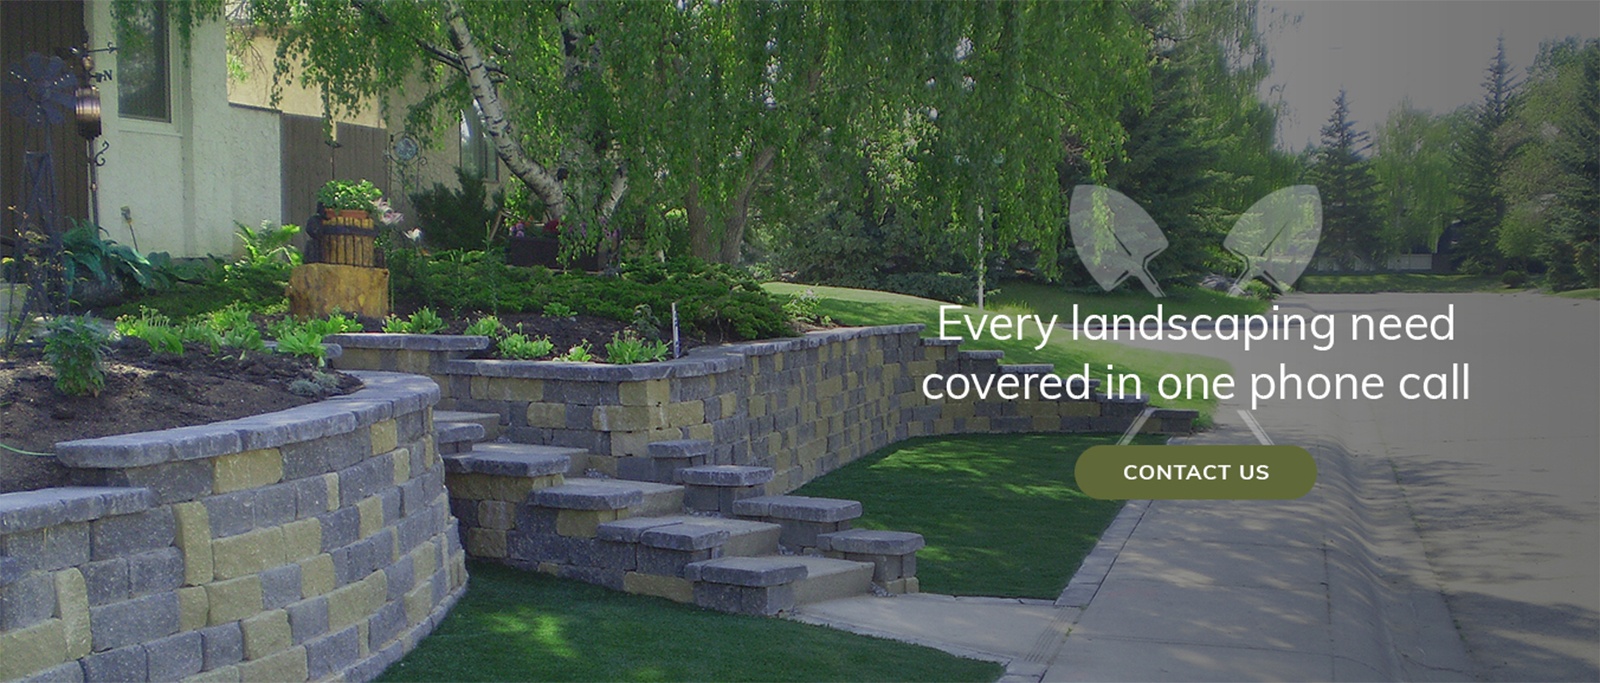 Every Landscaping Need Covered in One Phone Call - Brick, Rock and Block Landscaping